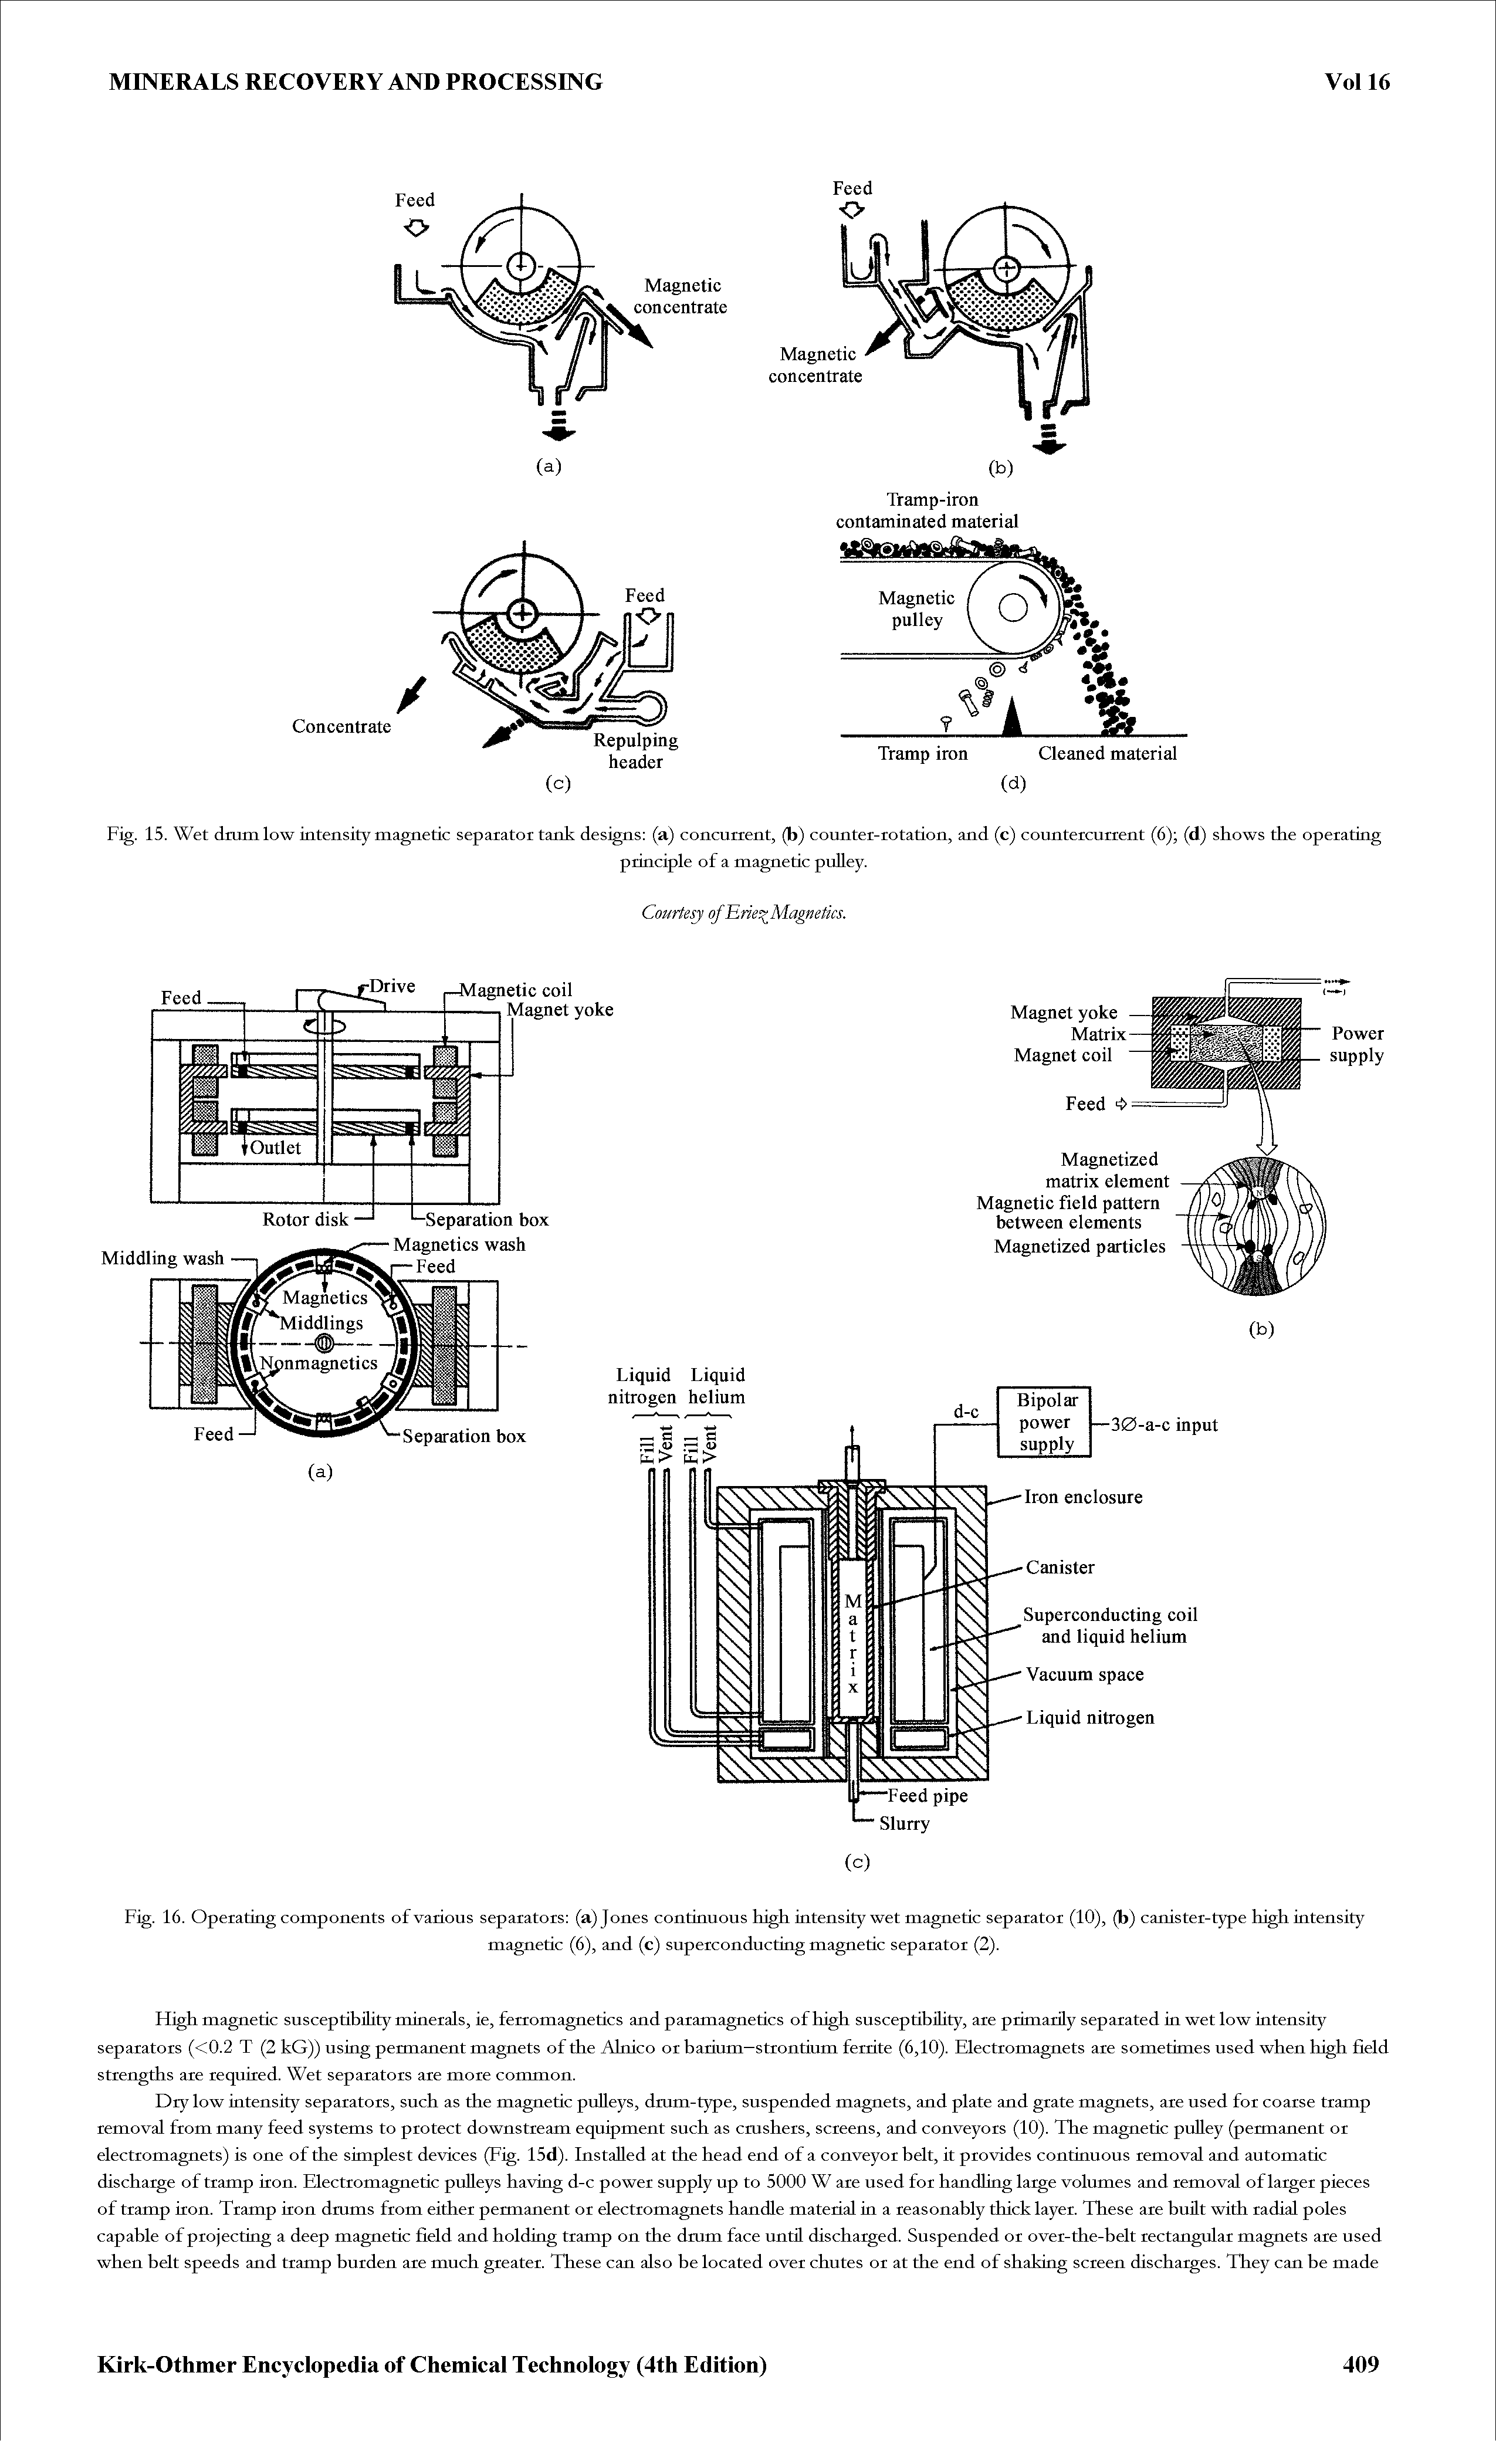 Fig. 15. Wet drum low intensity magnetic separator tank designs (a) concurrent, (b) counter-rotation, and (c) countercurrent (6) (d) shows the operating...